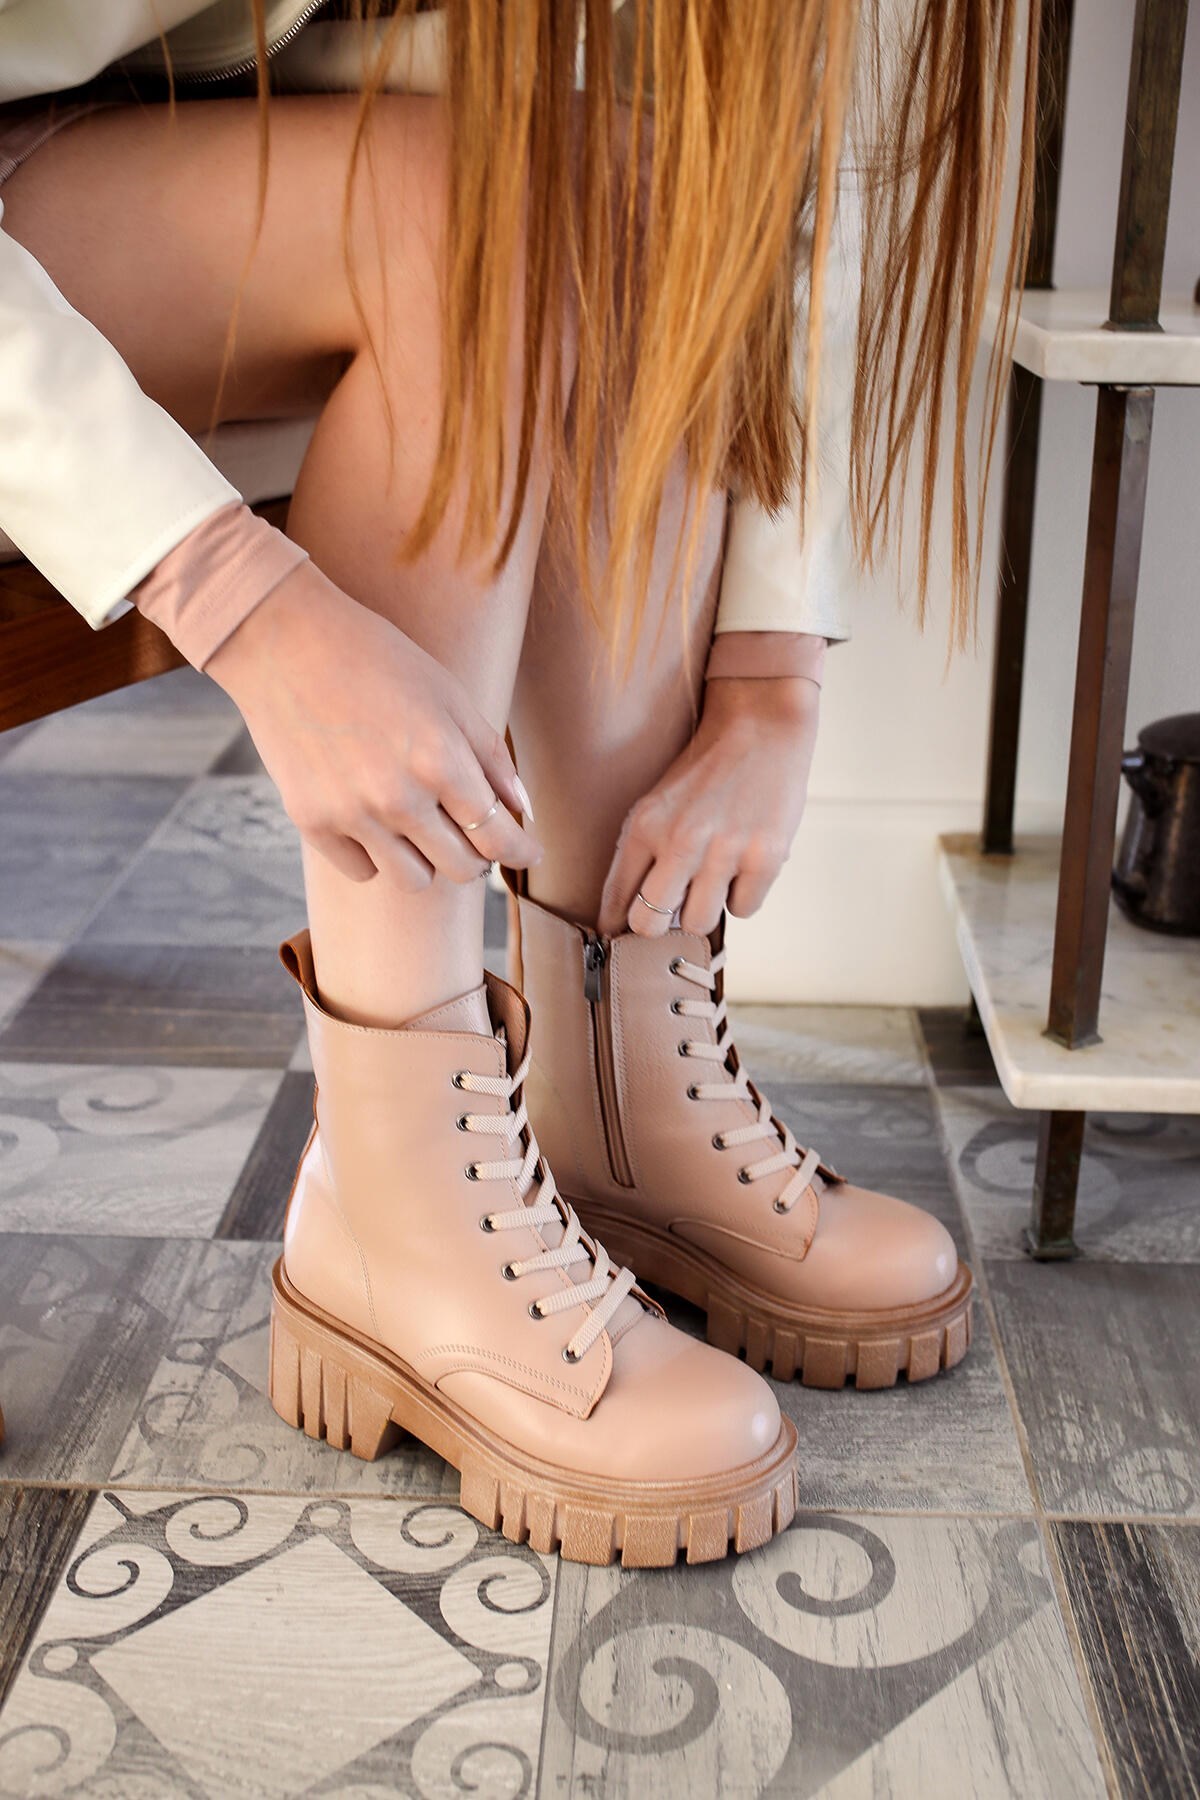 Girl nude boots